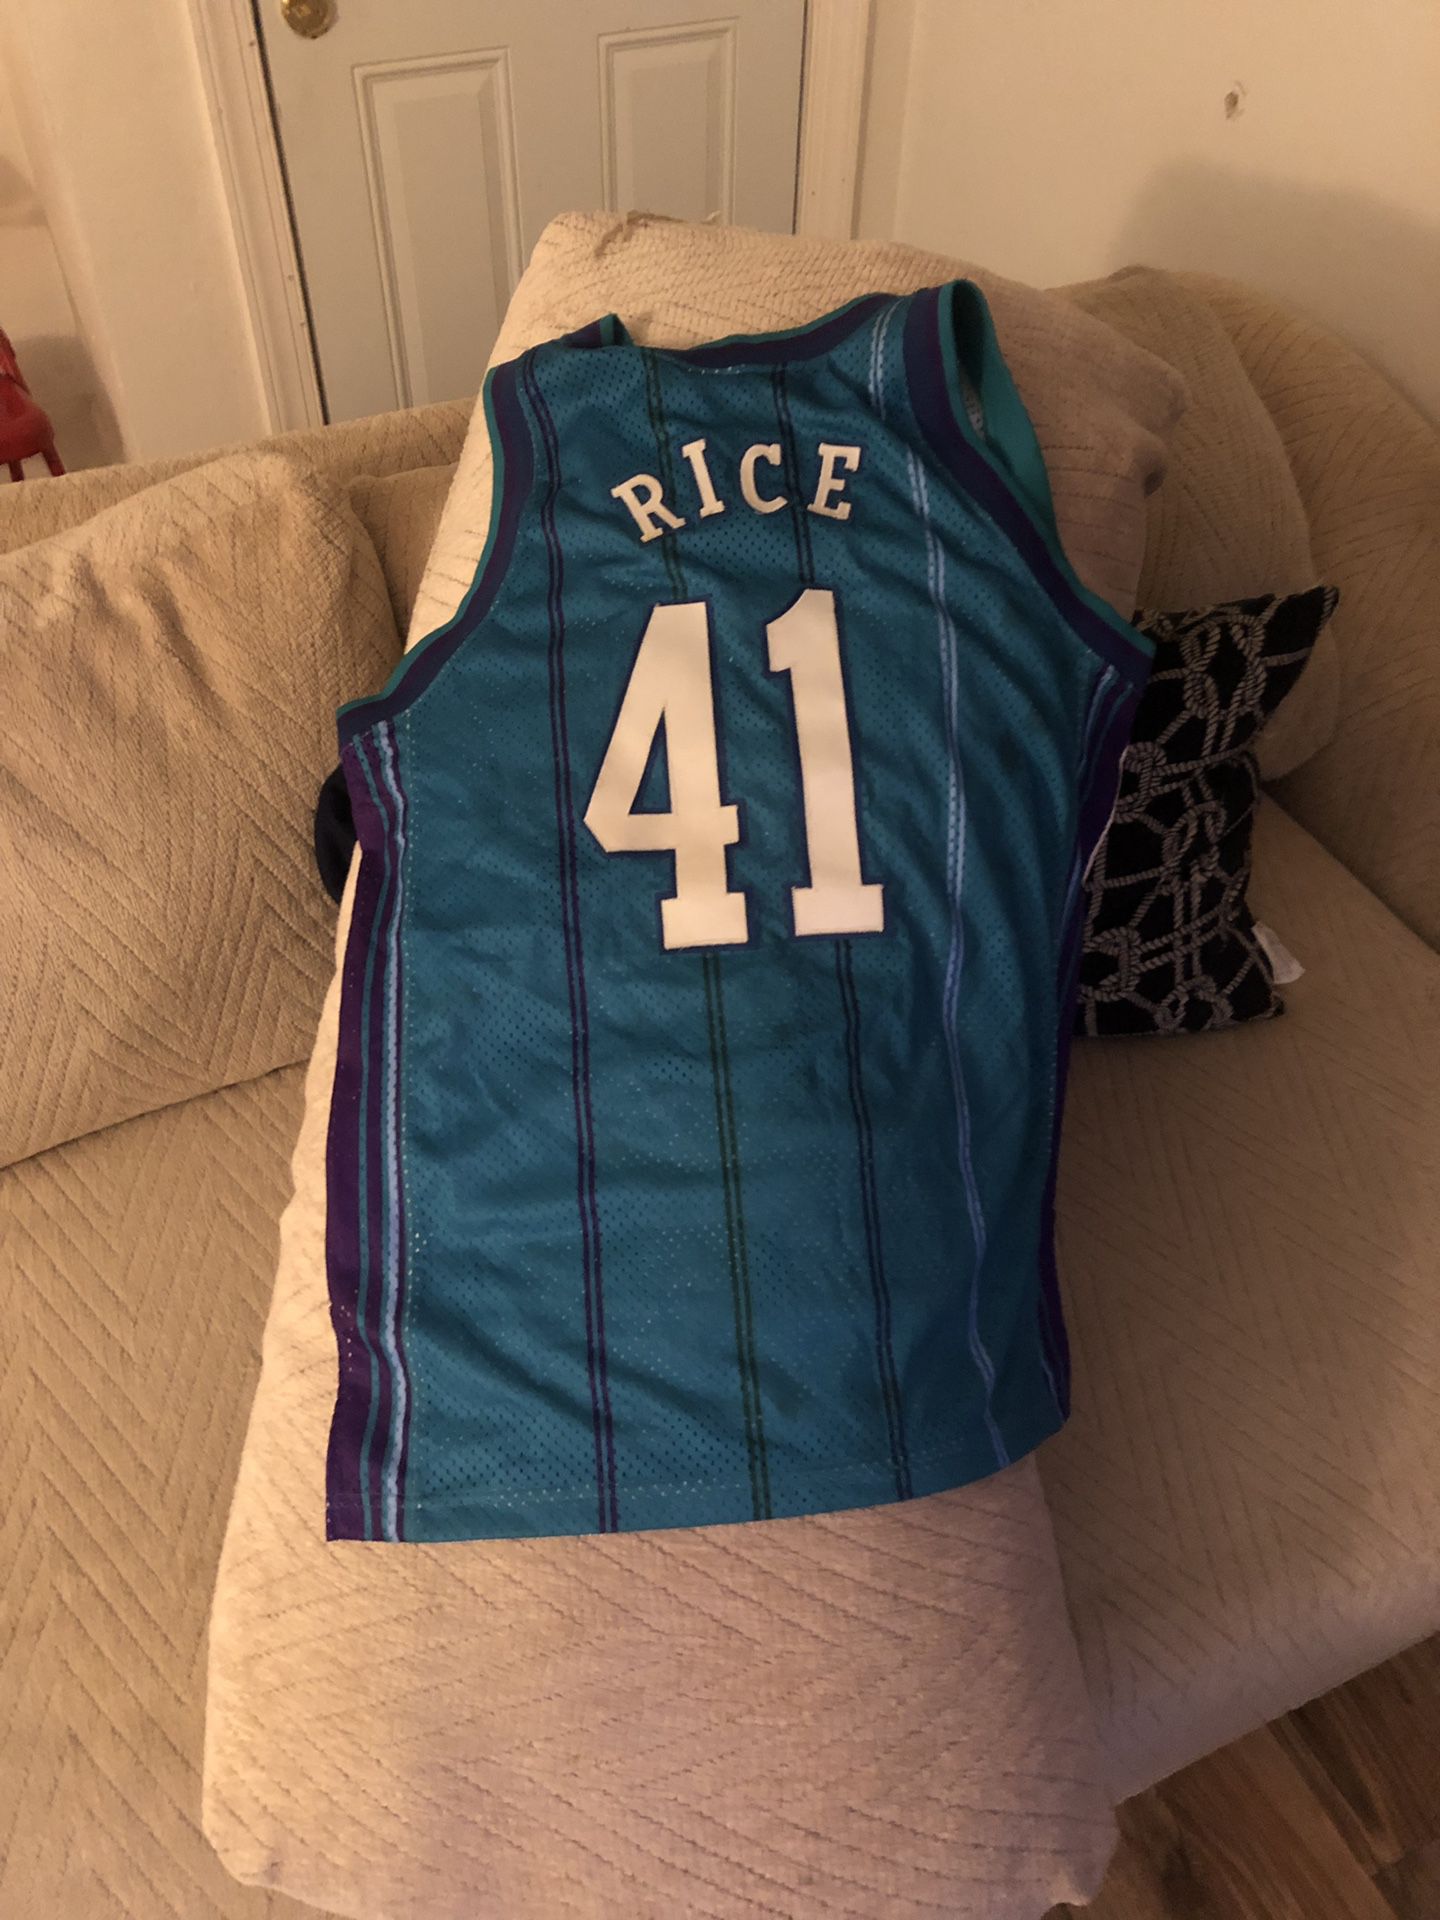 Charlotte Hornets/Dreamville #4 Jersey for Sale in Charlotte, NC - OfferUp